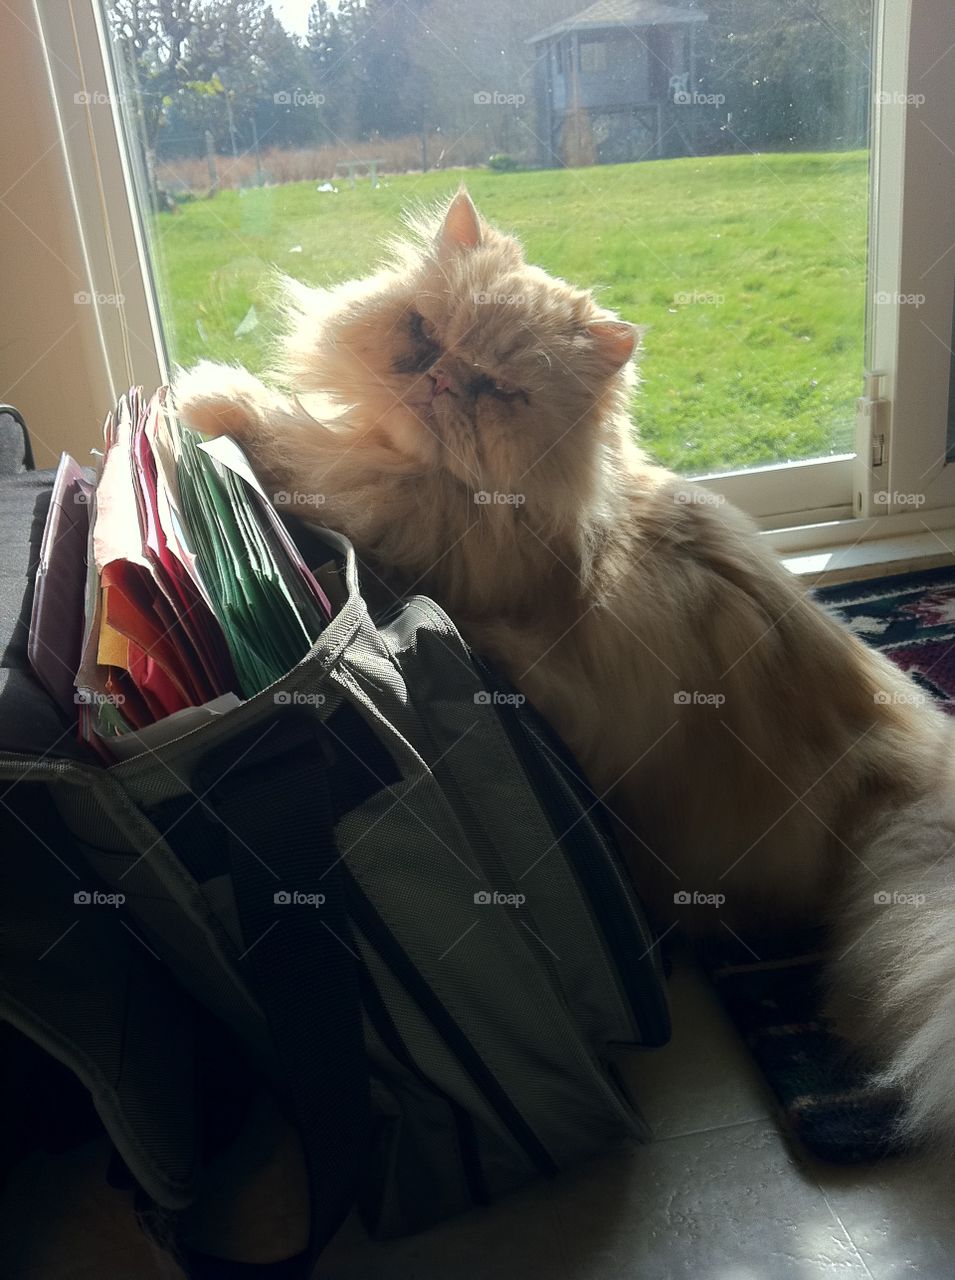 My loveable old Persian boy often liked to oversee my weekend work and would constantly remain nearby to ensure that I completed all needed tasks. On this day the sun had been shining through the window, warming my briefcase. He apparently sensed the warmth and was content to half lean and half curl up against the side, while gripping the top to keep himself from falling down. A lazy cat, yes! But an efficient problem solver when finding a warm spot is the mission!
